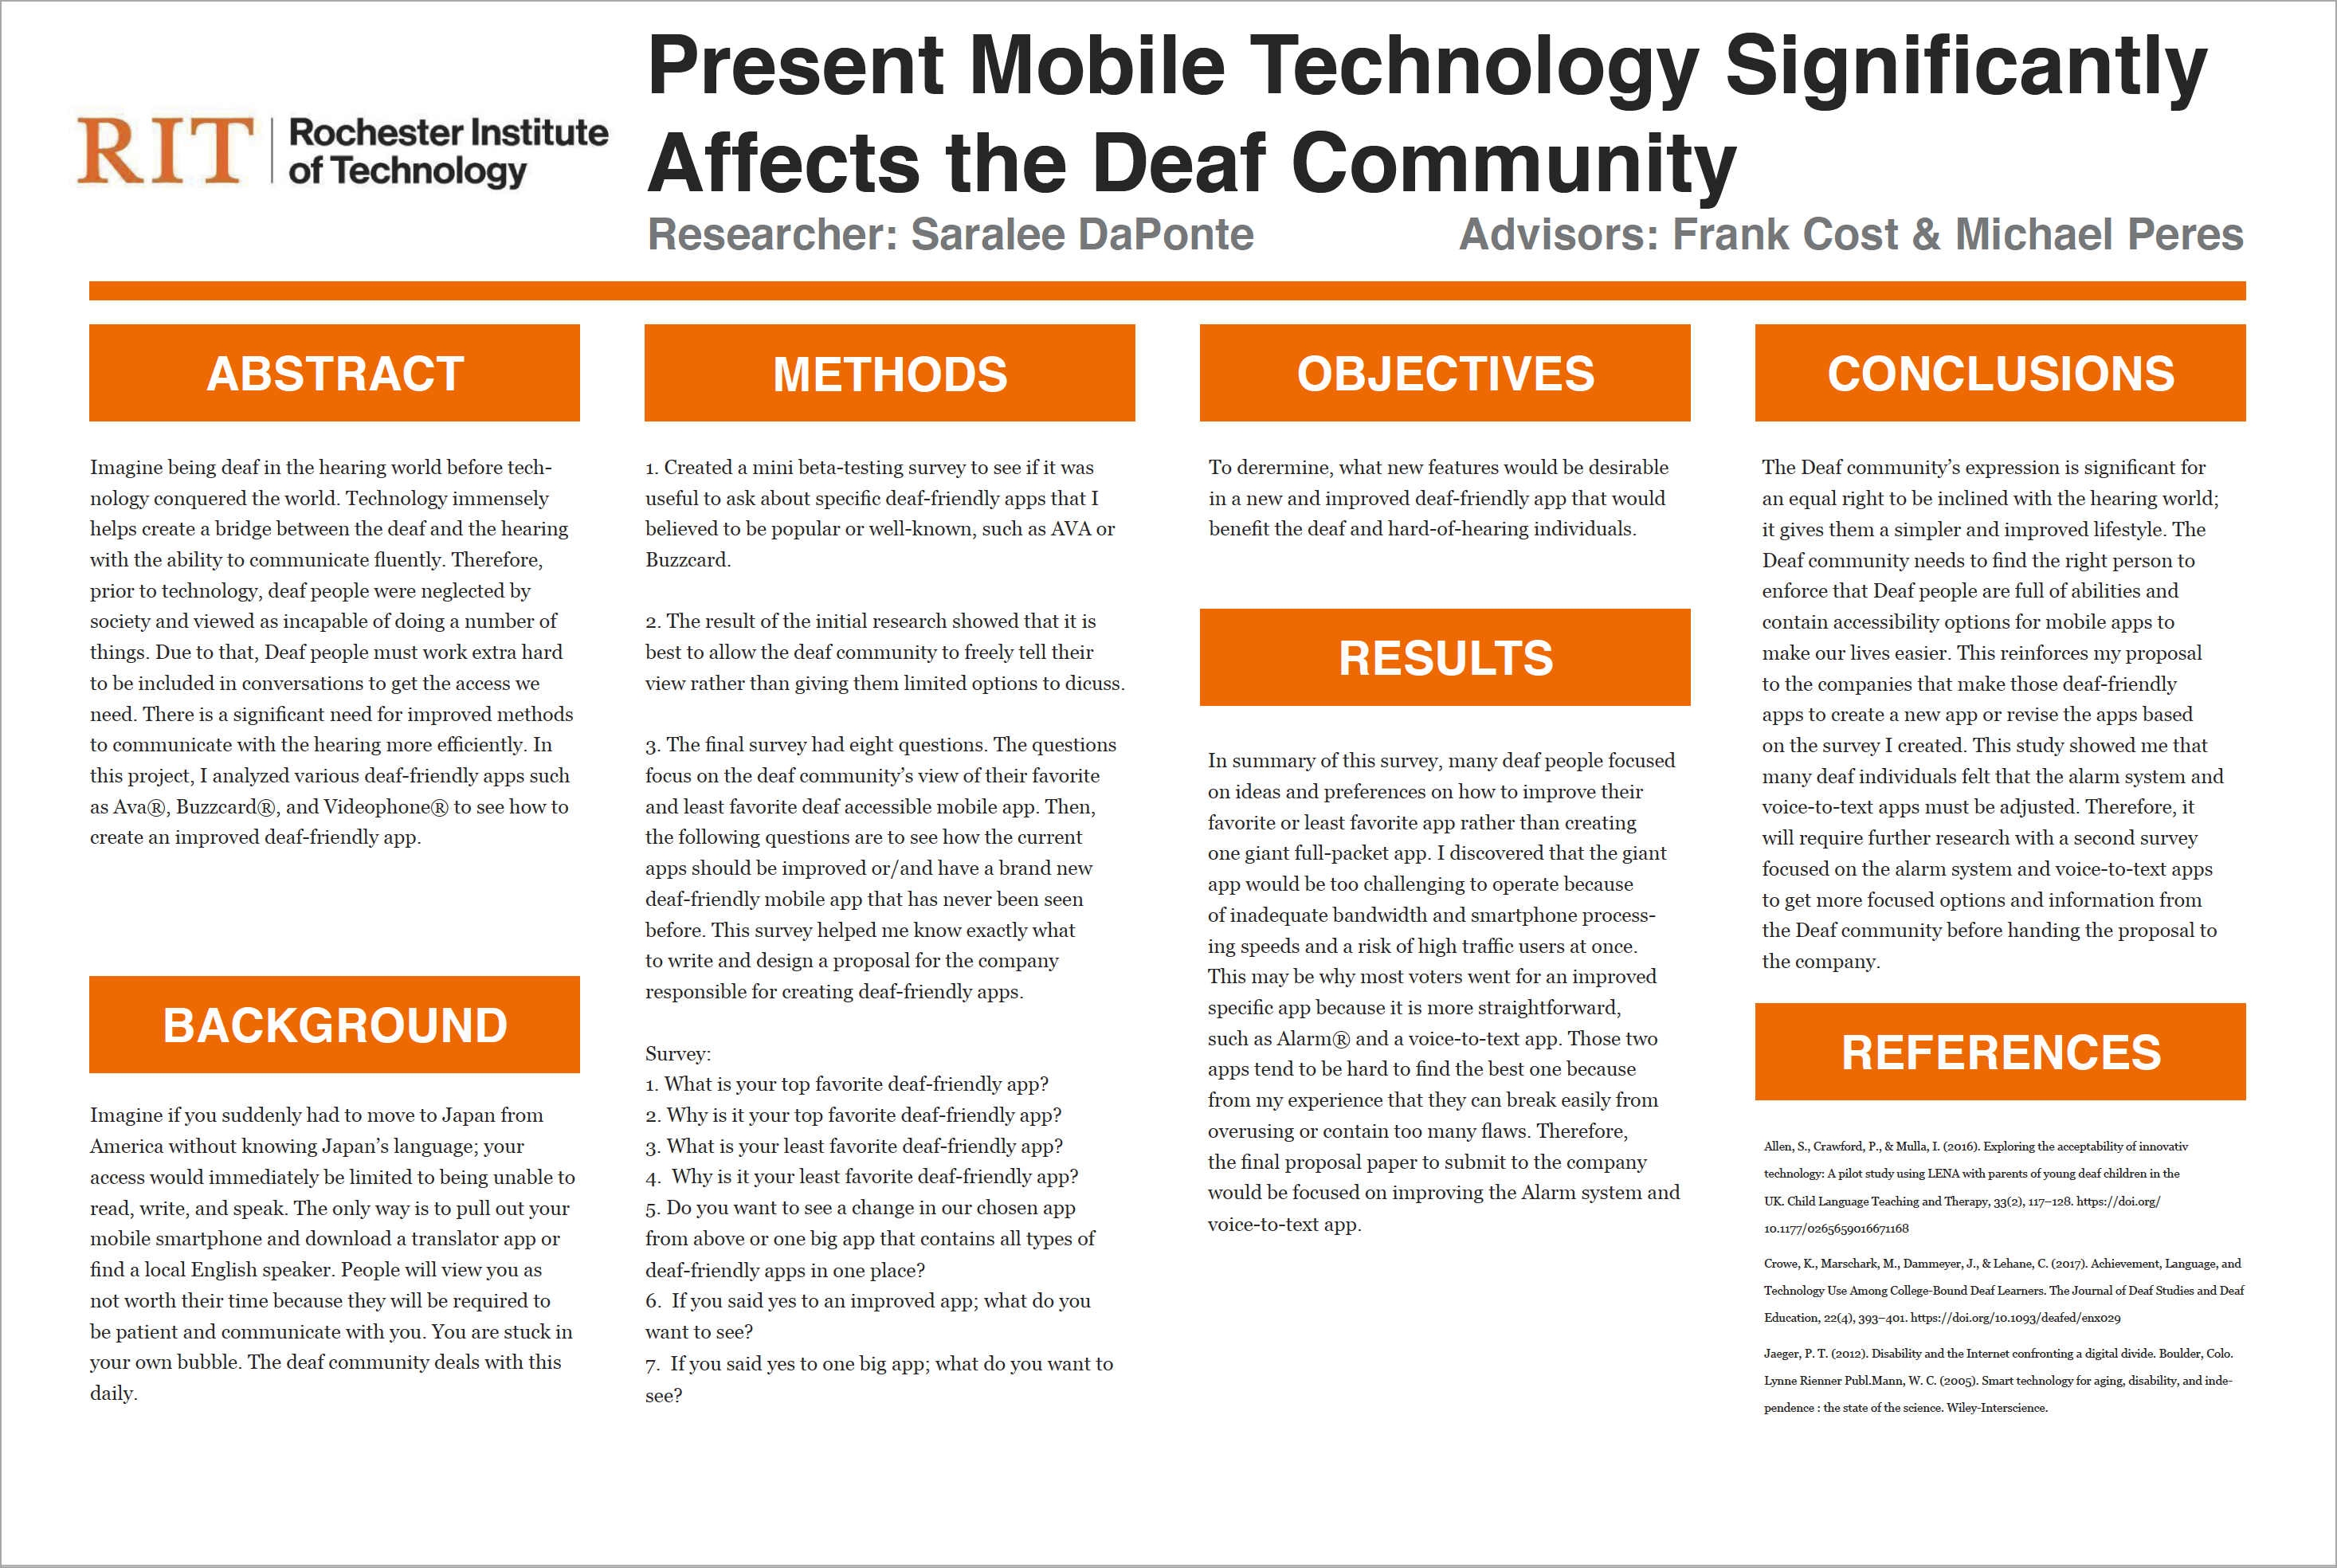 A poster highlighting research on how mobile technology significantly affects the Deaf community.